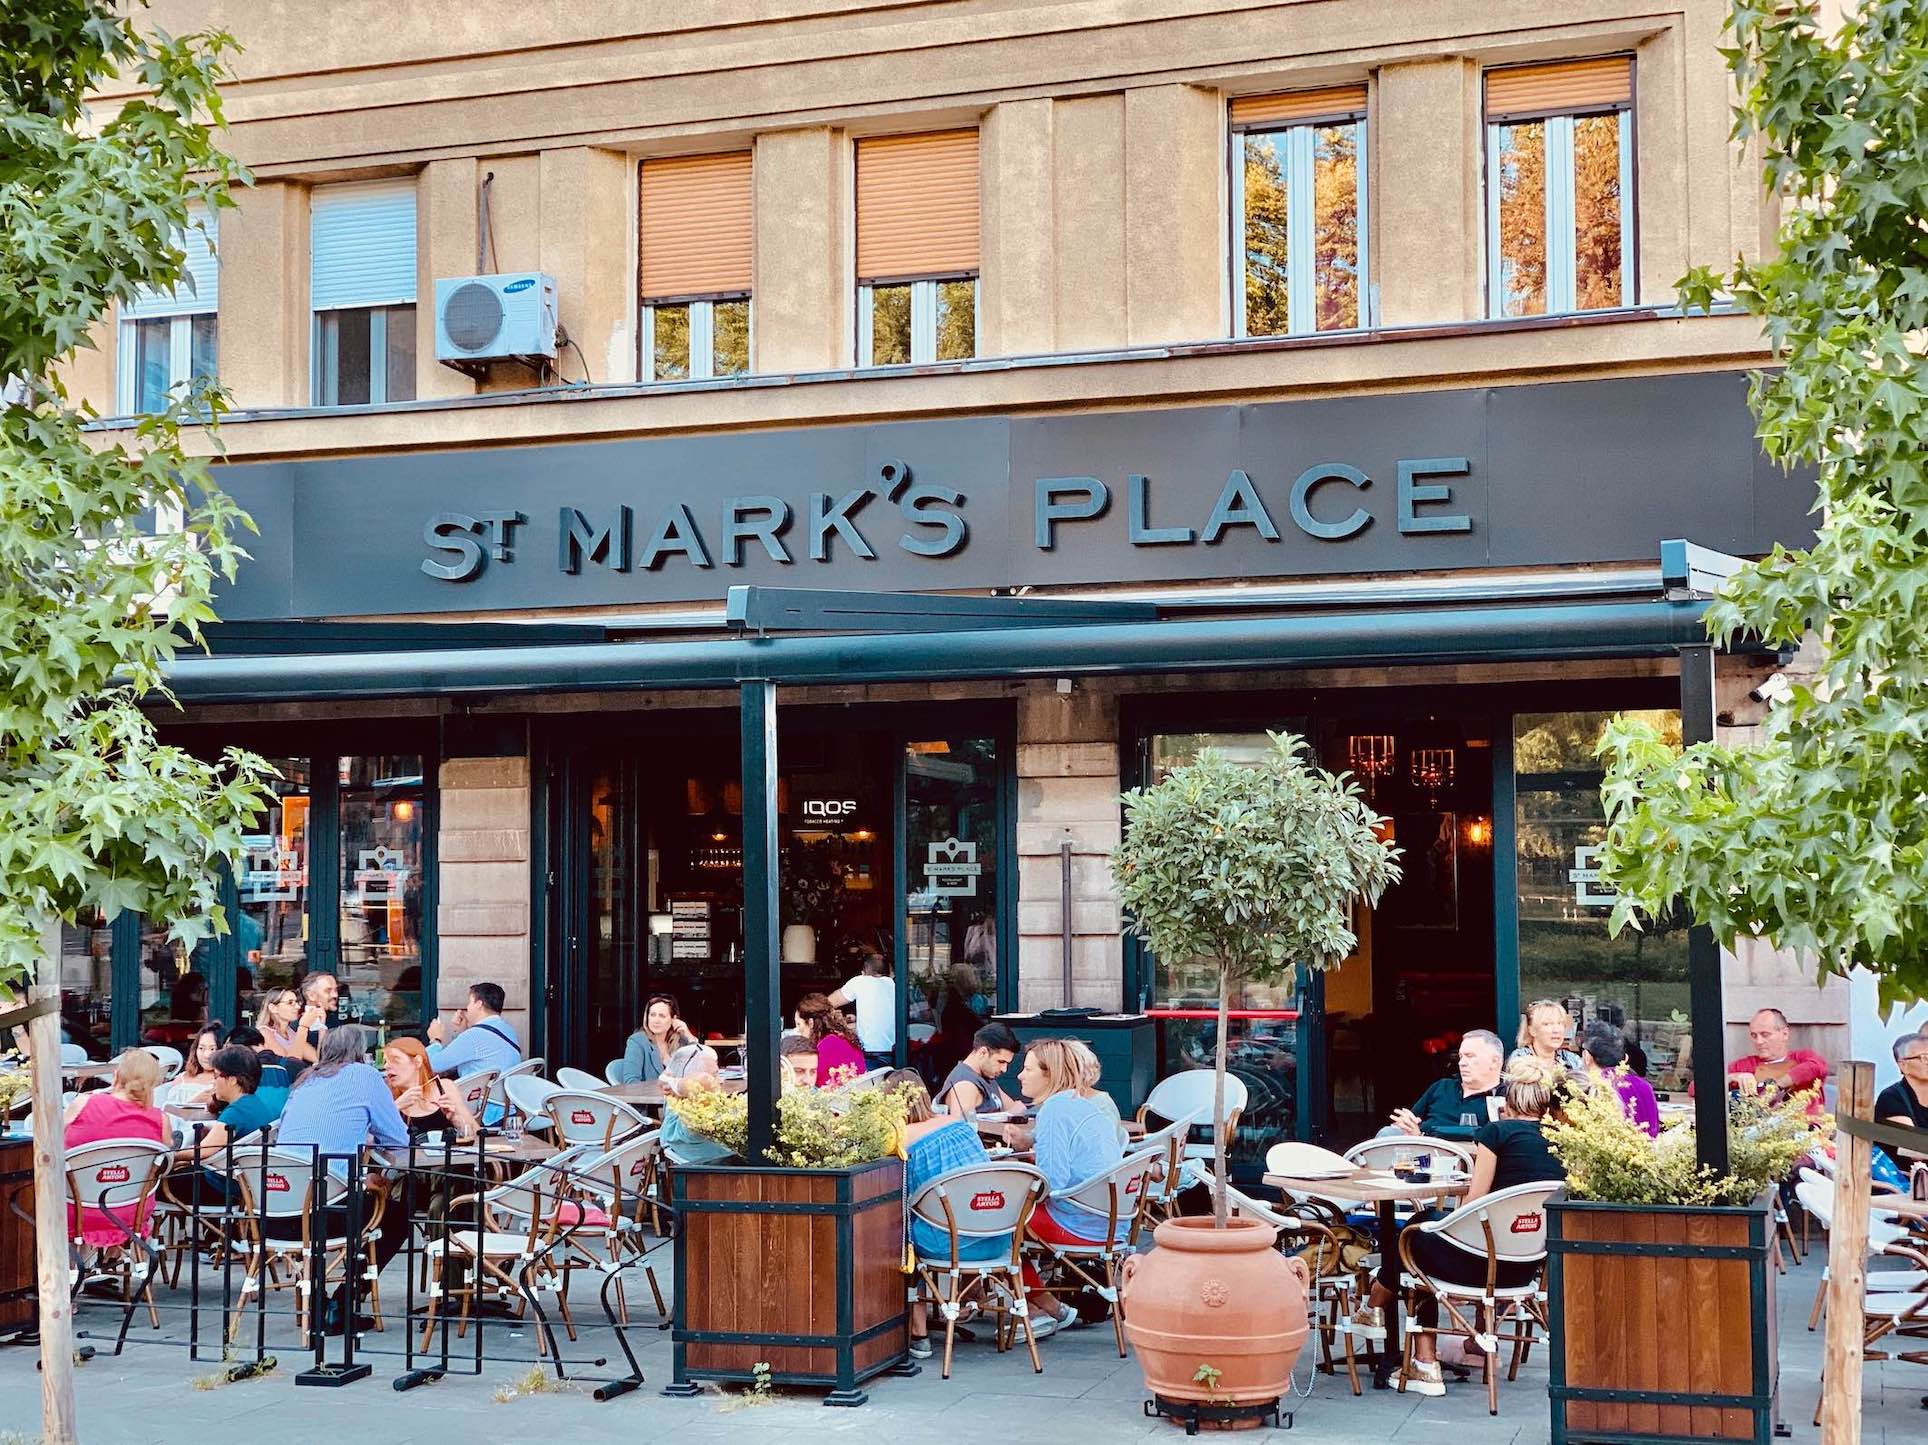 St Mark's Place Restaurant and bar in Belgrade